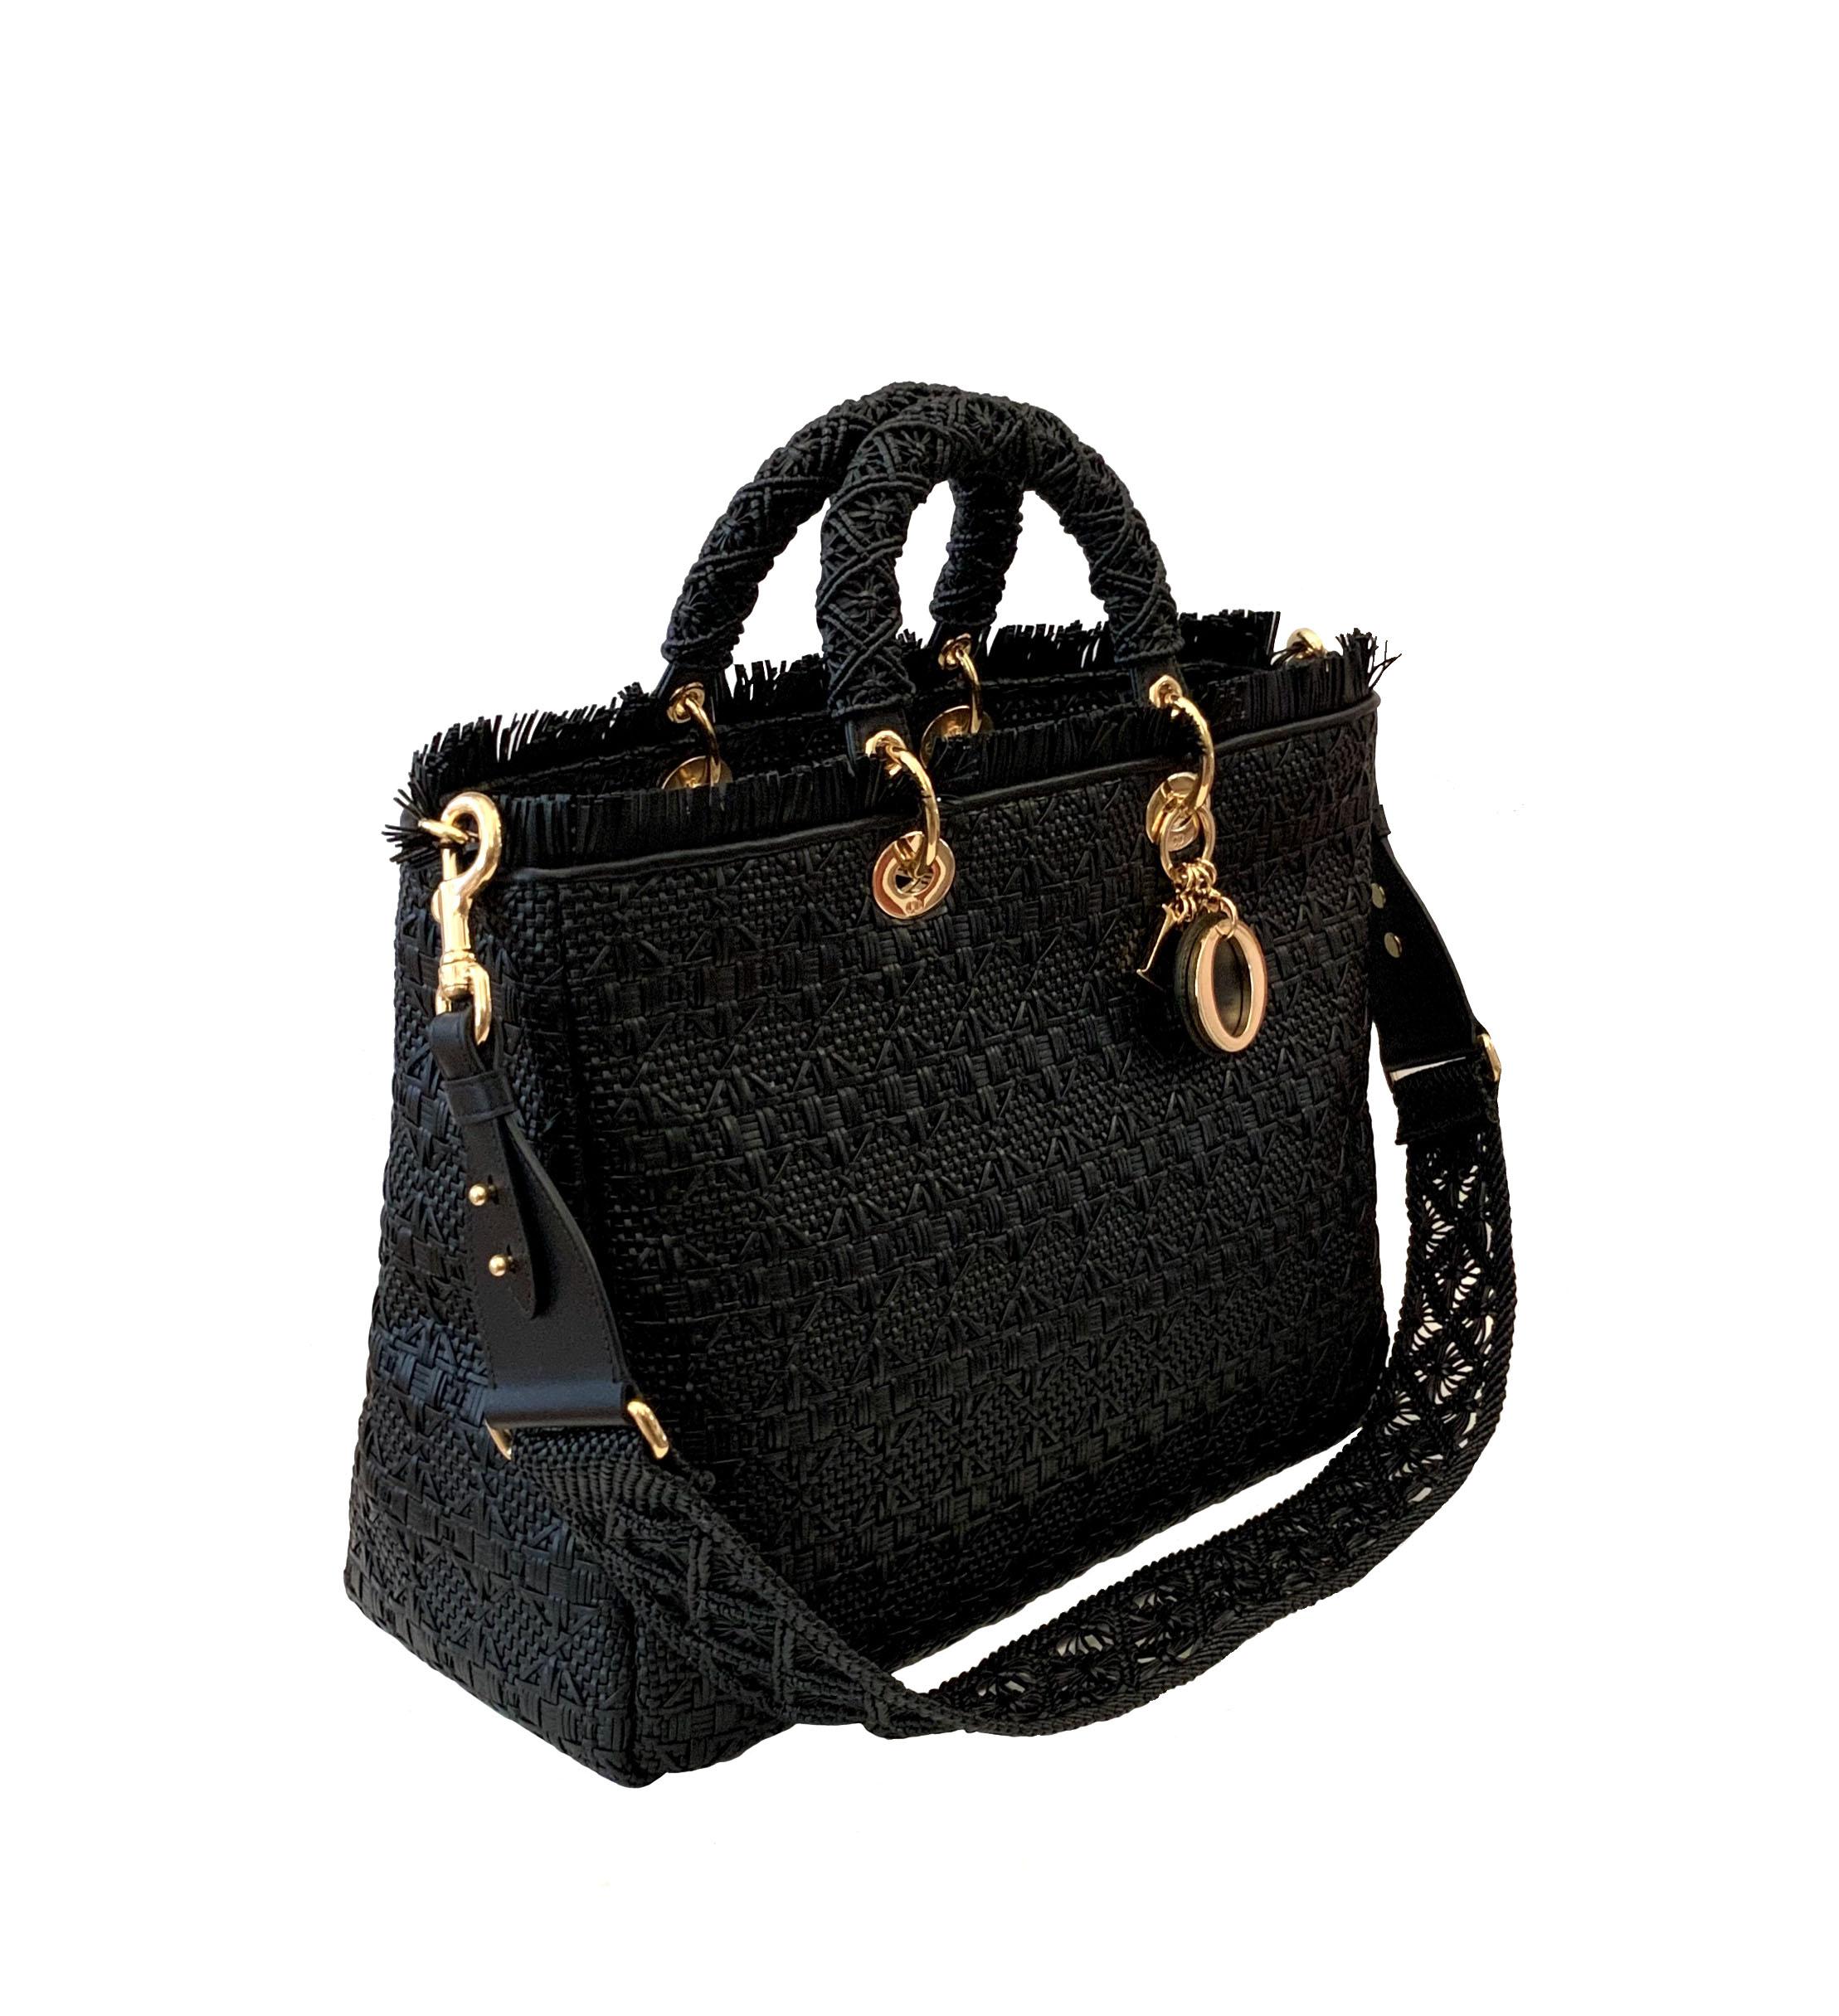 Amazing work of art of Macramé style at the Dior House for this Limited Edition and New Lady Dior bag with its shoulder strap.
It is crafted in braided black lambskin leather strips in a diagonal quilted pattern.
It can be worn by the soft handles